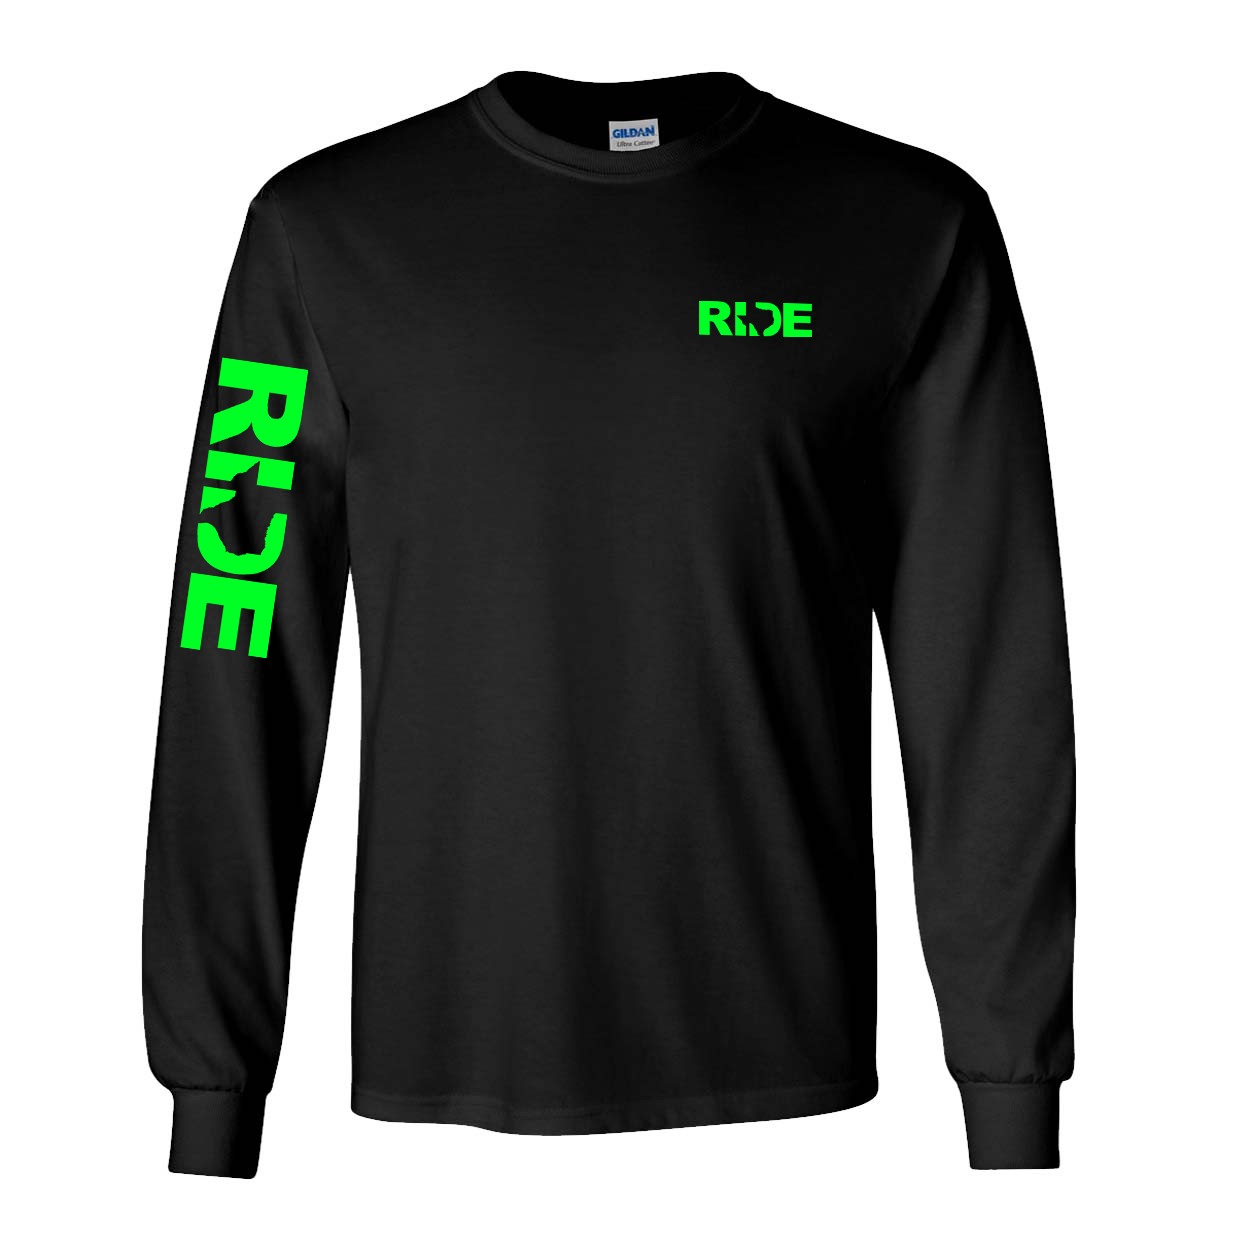 Ride Texas Night Out Long Sleeve T-Shirt with Arm Logo Black (Green Logo)